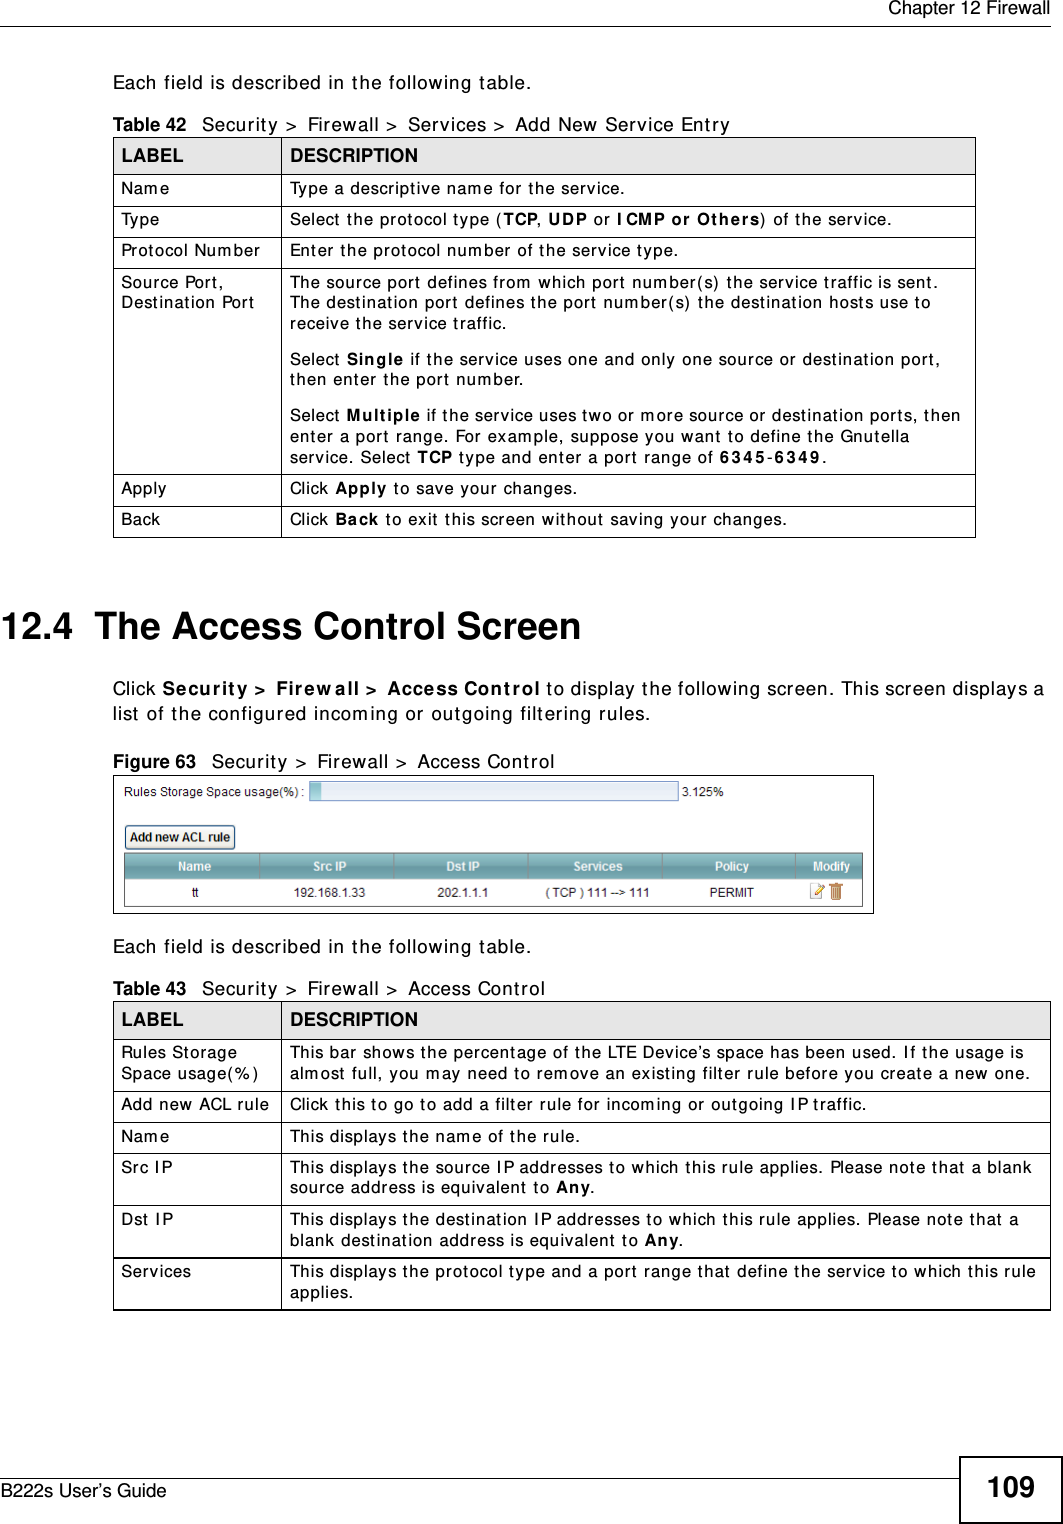  Chapter 12 FirewallB222s User’s Guide 109Each field is described in t he following t able.12.4  The Access Control ScreenClick Securit y &gt;  Fir ew all &gt;  Access Con t rol t o display t he following screen. This screen displays a list of the configured incom ing or out going filt ering rules. Figure 63   Secur it y &gt;  Firewall &gt;  Access Cont rolEach field is described in t he following t able.Table 42   Security &gt;  Firewall &gt;  Services &gt;  Add New Service Ent ryLABEL DESCRIPTIONNam e Type a descriptive nam e for t he service.Ty p e Select the prot ocol t ype ( TCP, UDP or I CMP or Oth er s)  of the service.Prot ocol Num ber Ent er the prot ocol num ber of t he service type.Source Port, Dest inat ion Por tThe source port defines from  which port num ber( s) t he ser vice t raffic is sent . The destinat ion port  defines t he port  num ber(s)  t he dest inat ion host s use t o receive t he service t raffic.Select  Single if t he service uses one and only  one sour ce or dest ination port , then ent er the port  num ber.Select  M ultiple  if t he ser vice uses t wo or m ore source or  dest inat ion por ts, t hen ent er a port  range. For exam ple, suppose you want  t o define t he Gnutella service. Select TCP t ype and ent er a port  range of 6 3 4 5 -6 3 4 9 .Apply Click Apply t o save you r changes.Back Click  Ba ck t o exit  t his screen wit hout saving your changes.Table 43   Security &gt;  Firewall &gt;  Access ControlLABEL DESCRIPTIONRules Storage Space usage( % )This bar show s t he percent age of t he LTE Device’s space has been used. I f the usage is alm ost full, you m ay need to rem ove an existing filt er r ule before you creat e a new one.Add new ACL rule Click t his t o go t o add a filt er rule for incom ing or out going I P t raffic.Nam e This displays t he nam e of t he rule.Src I P This displays t he source I P addr esses t o w hich t his rule applies. Please note that  a blank source address is equivalent t o Any.Dst I P This displays t he dest inat ion I P addr esses to which t his r ule applies. Please note t hat  a blank destinat ion address is equivalent  t o Any.Services This displays the prot ocol type and a port  range t hat  define t he ser vice t o which t his rule applies.